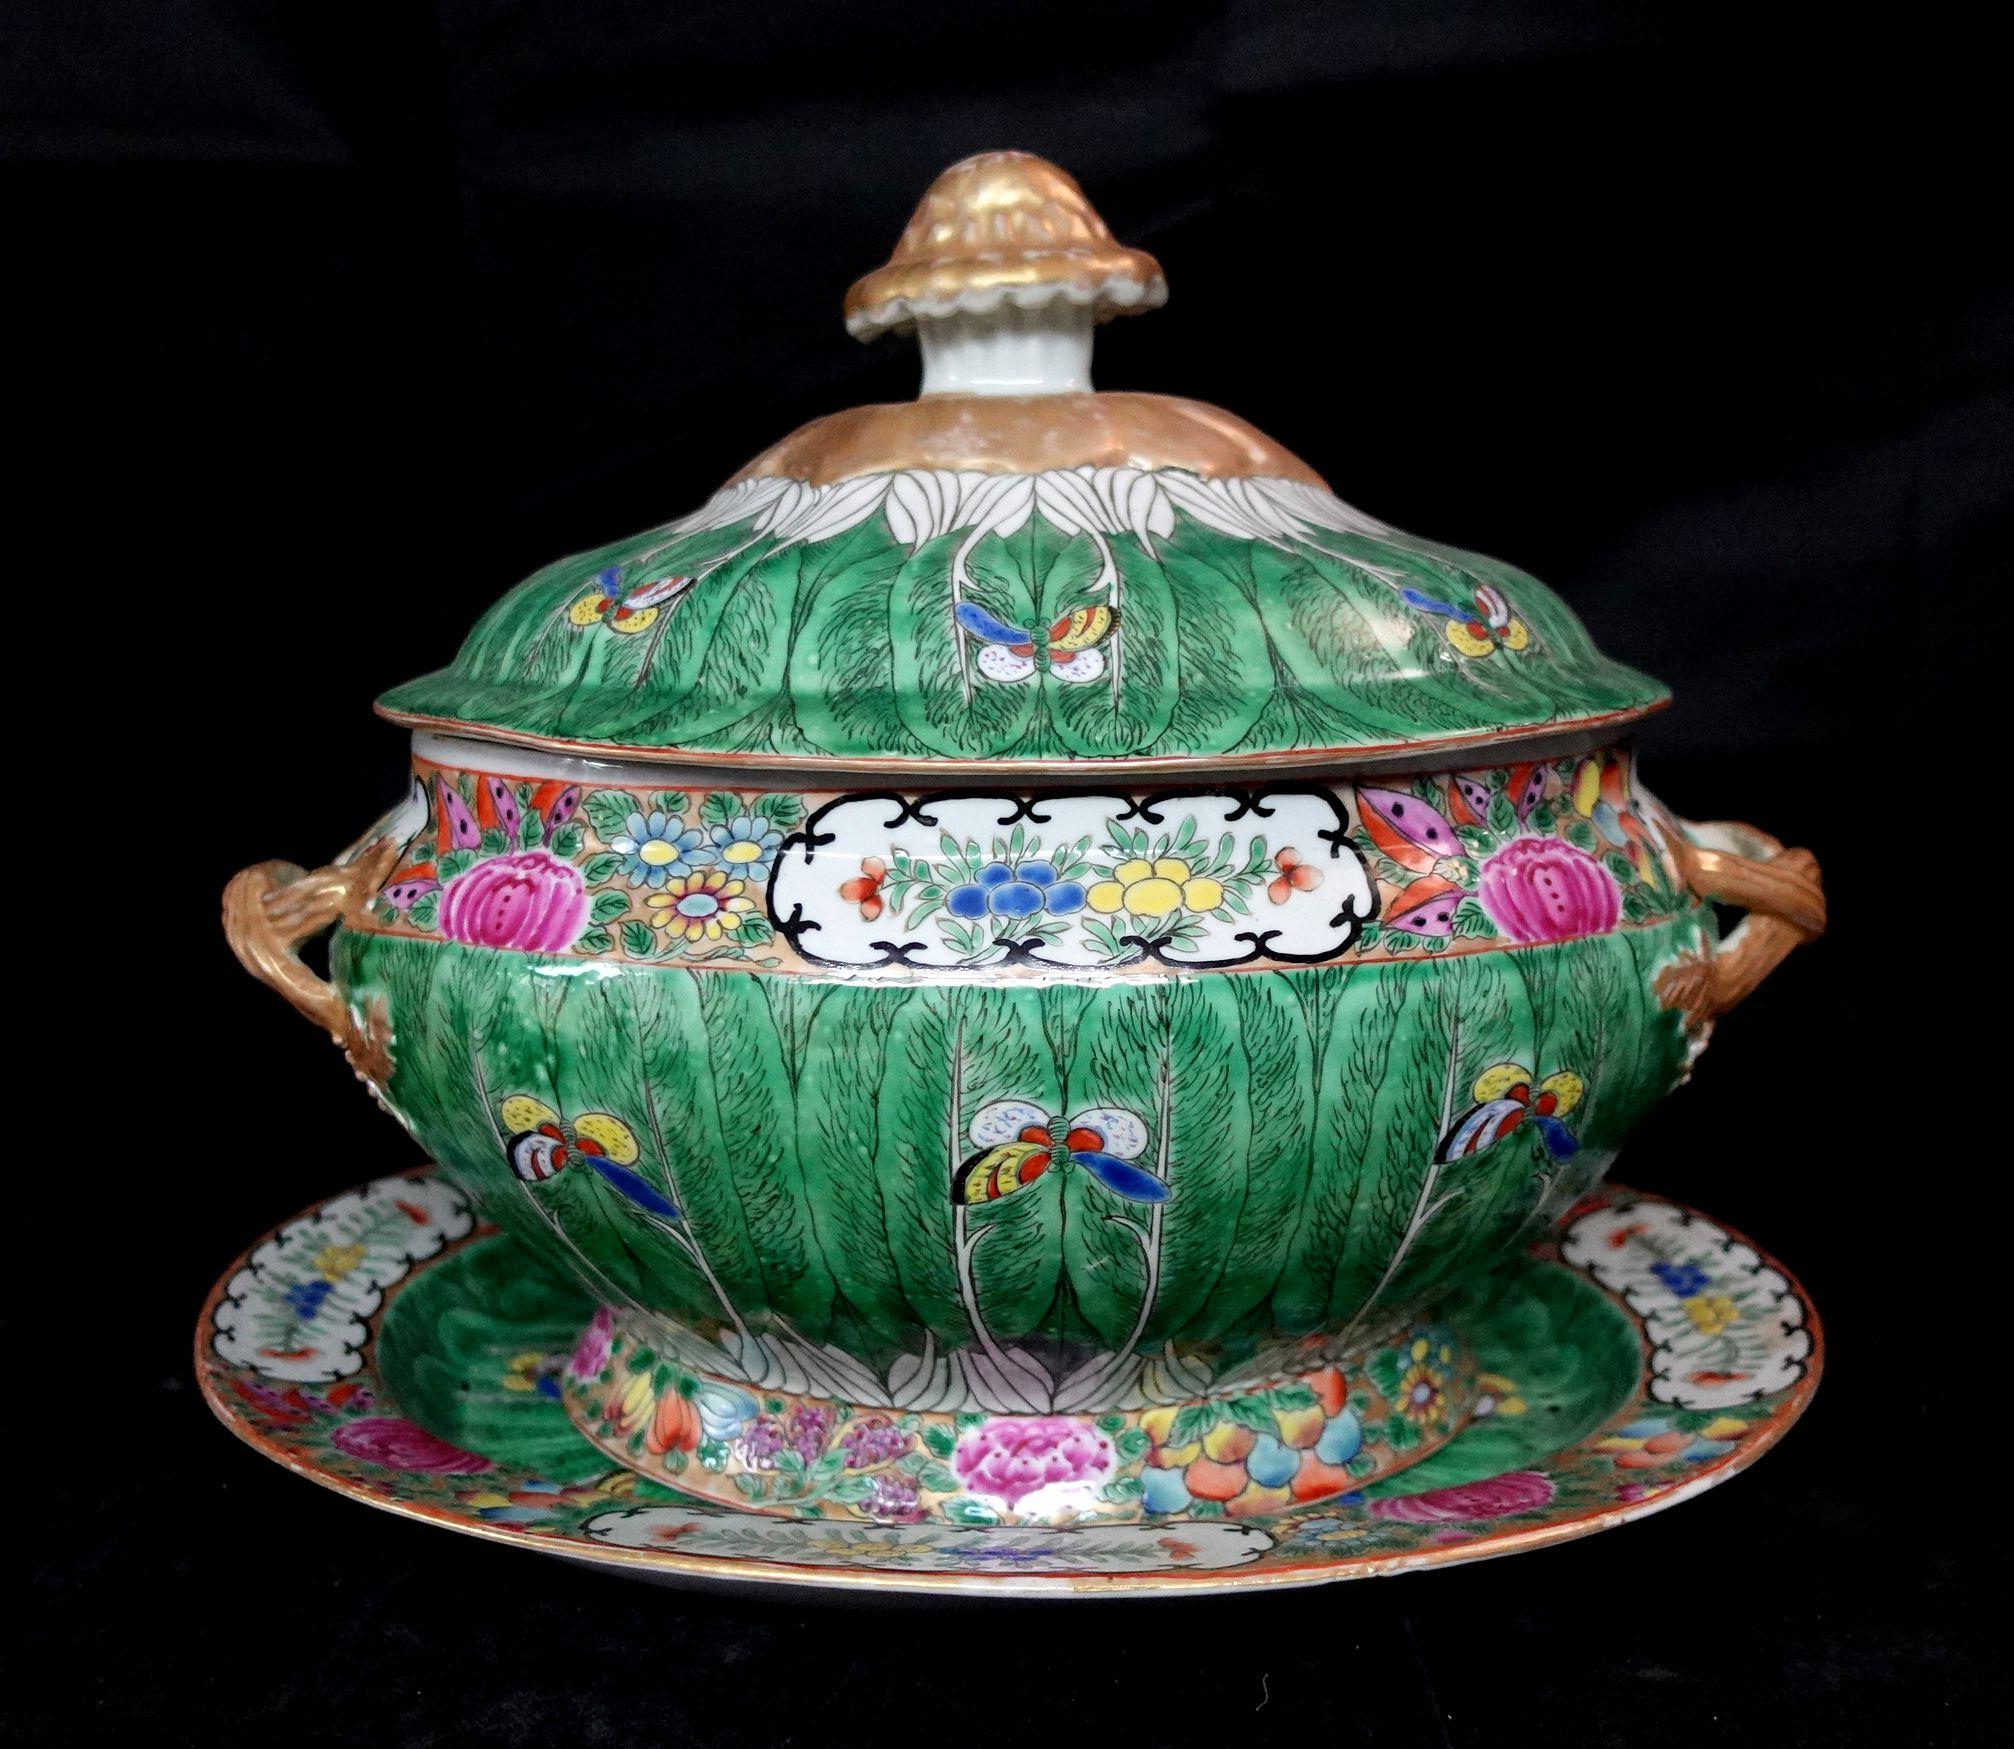 Large Chinese Antique Famille Cabbage leaf porcelain tureen & platter with a complicated design of many objects composed a unique and beautiful art, The main subject is the Cabbage Leafe with many butterflies painted on the middle portion and